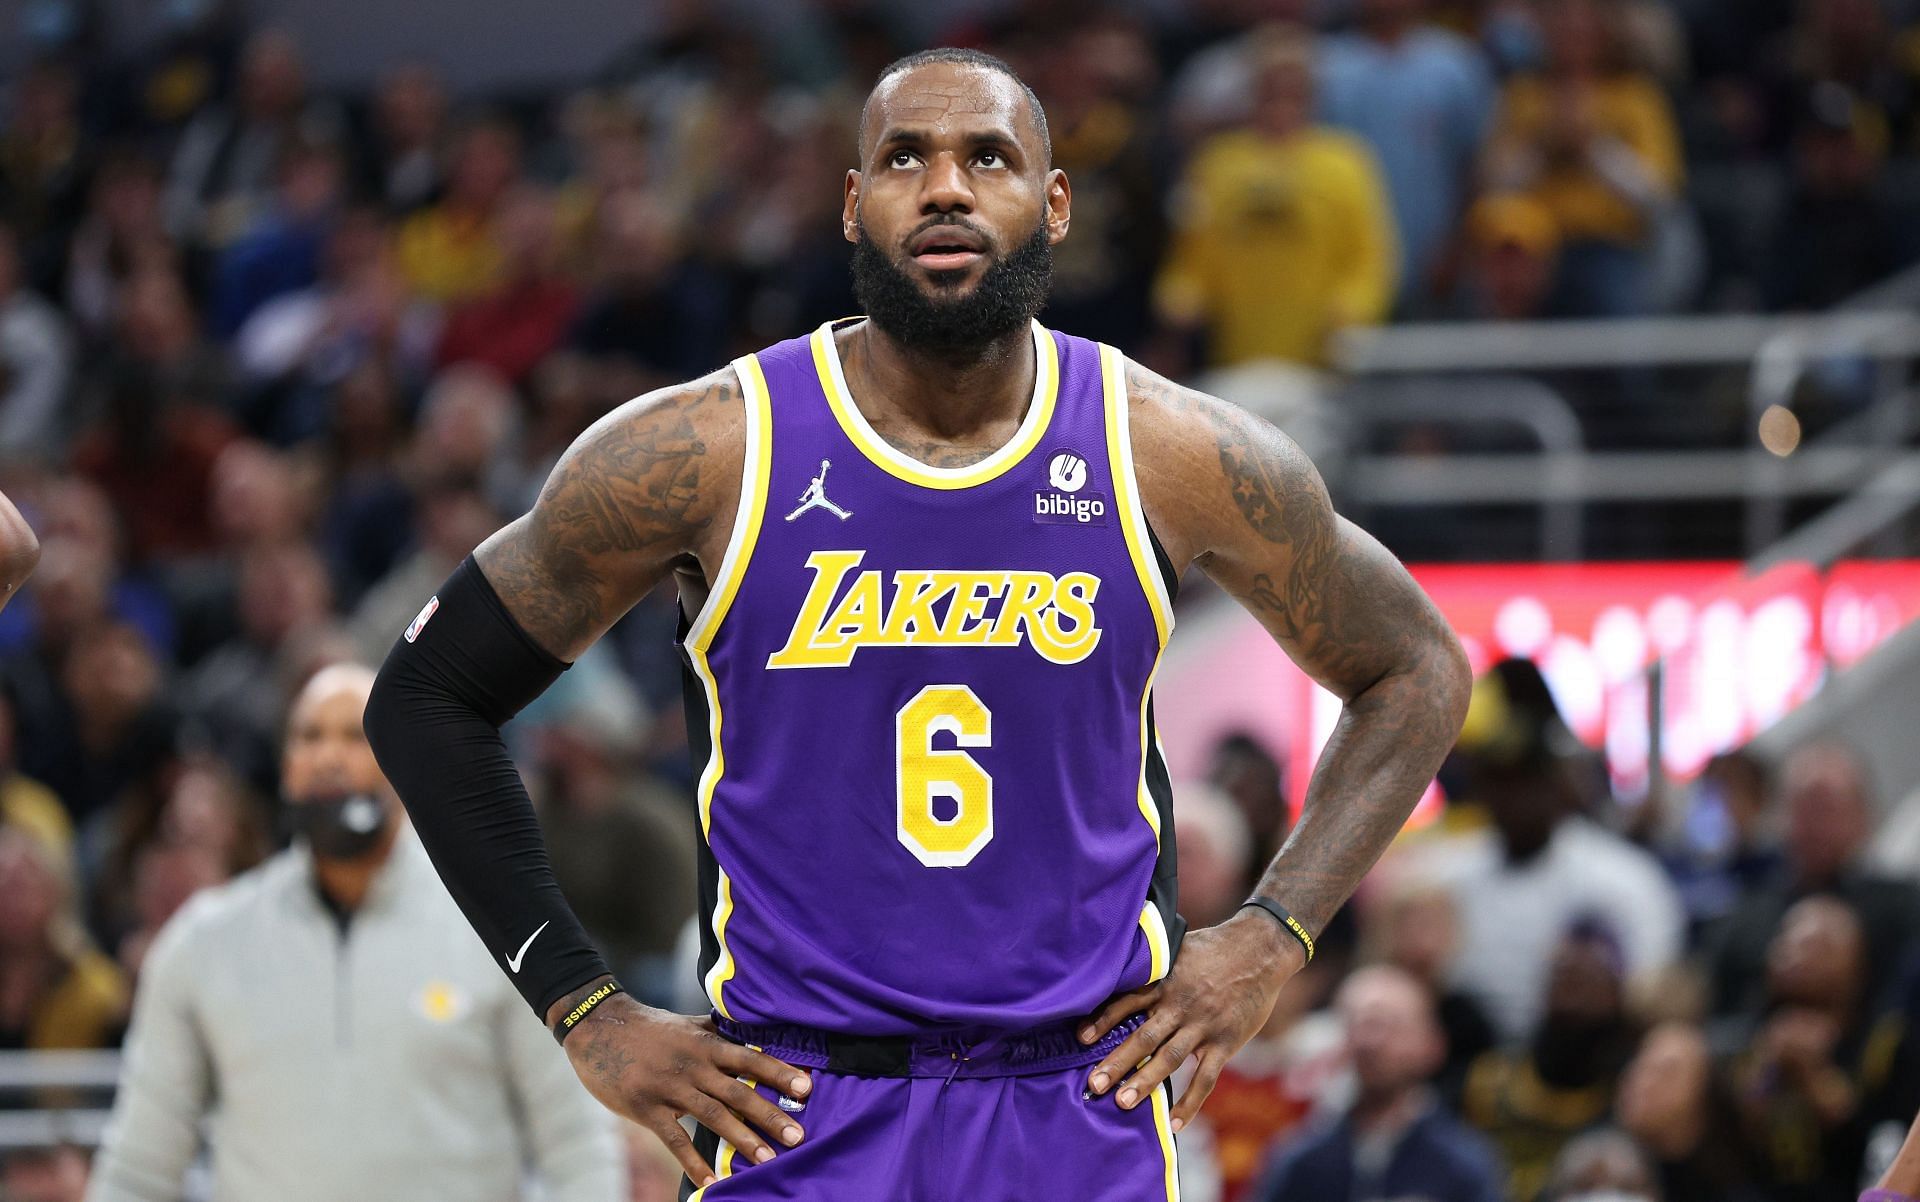 LeBron James #6 of the Los Angeles Lakers against the Indiana Pacers at Gainbridge Fieldhouse on November 24, 2021, in Indianapolis, Indiana.